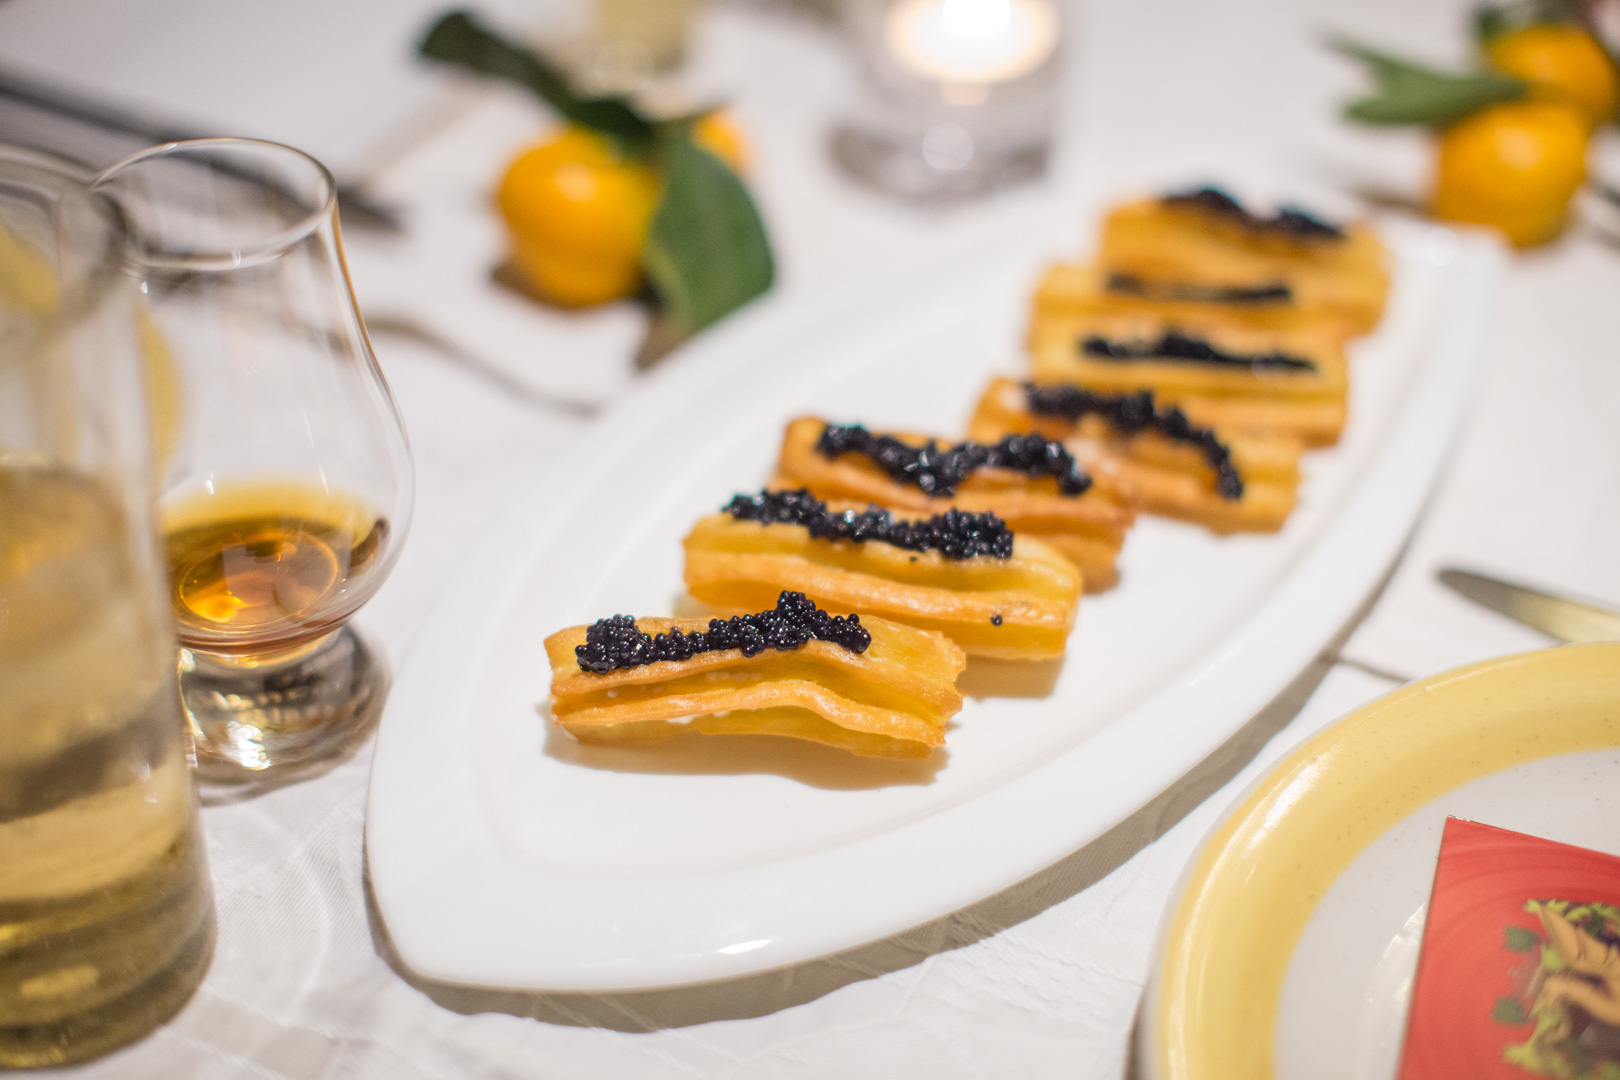 Chef Tadeo's choice of best food pairing with the Sevillana is the churros and caviar with sour cream and dill